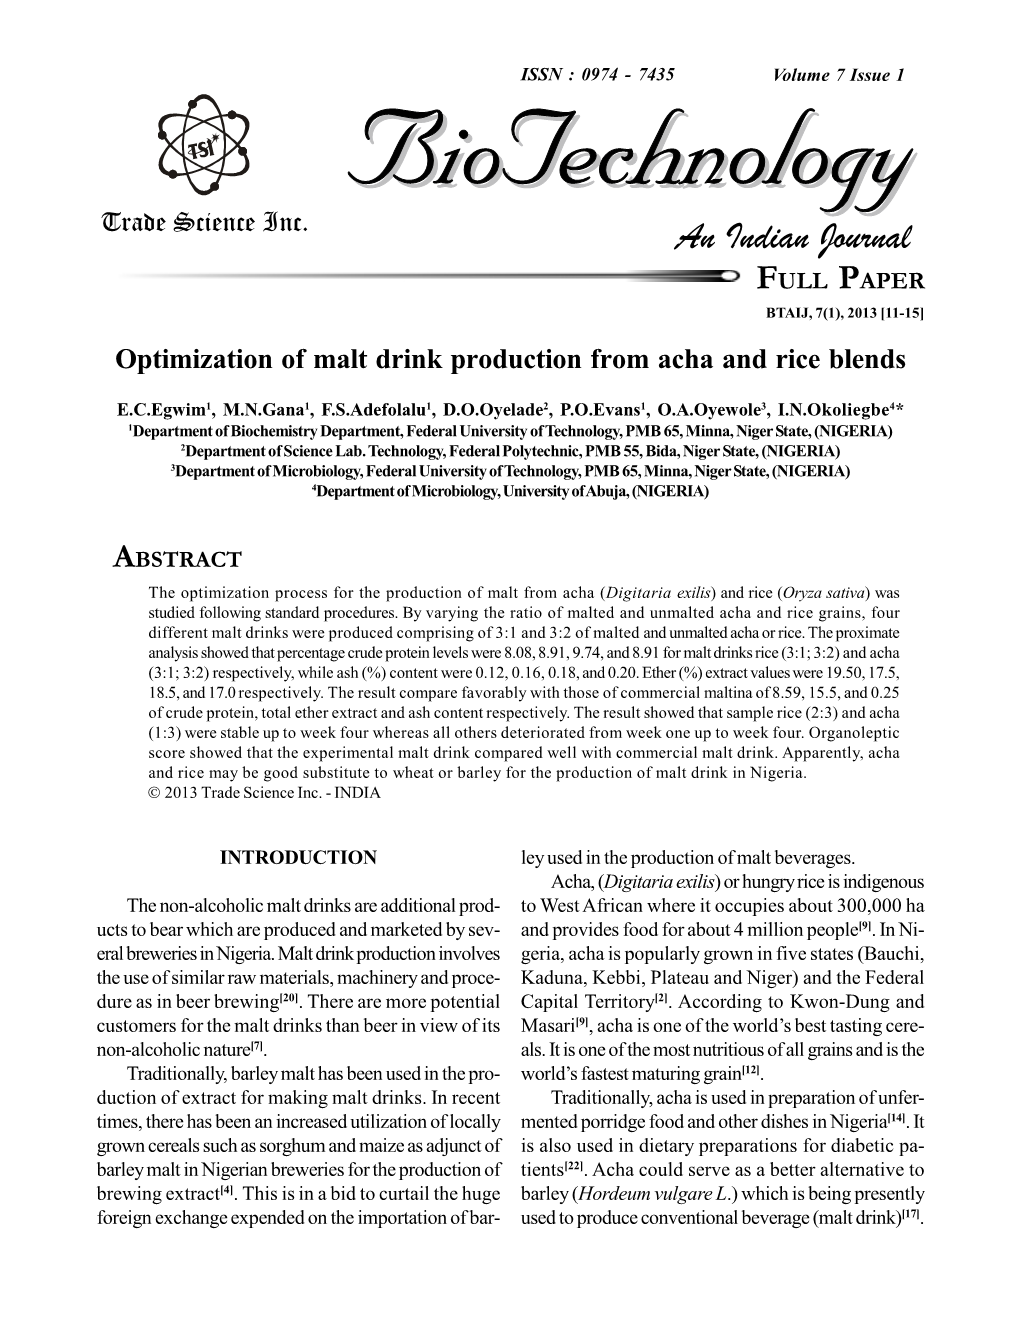 Optimization of Malt Drink Production from Acha and Rice Blends